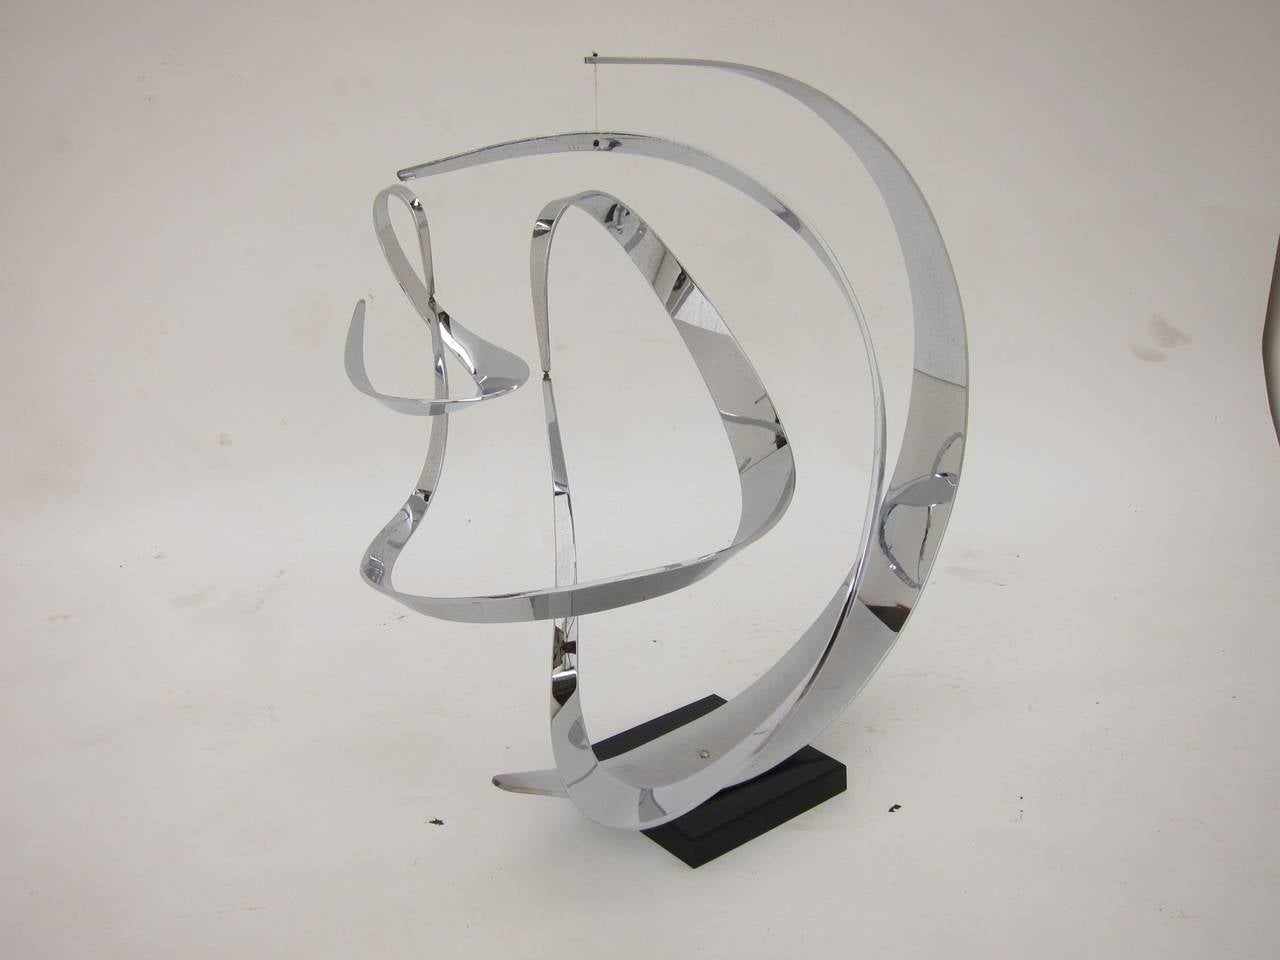 Kinetic sculpture by John W. Anderson. Solid polished aluminum on acrylic base. Signed and dated 1974.